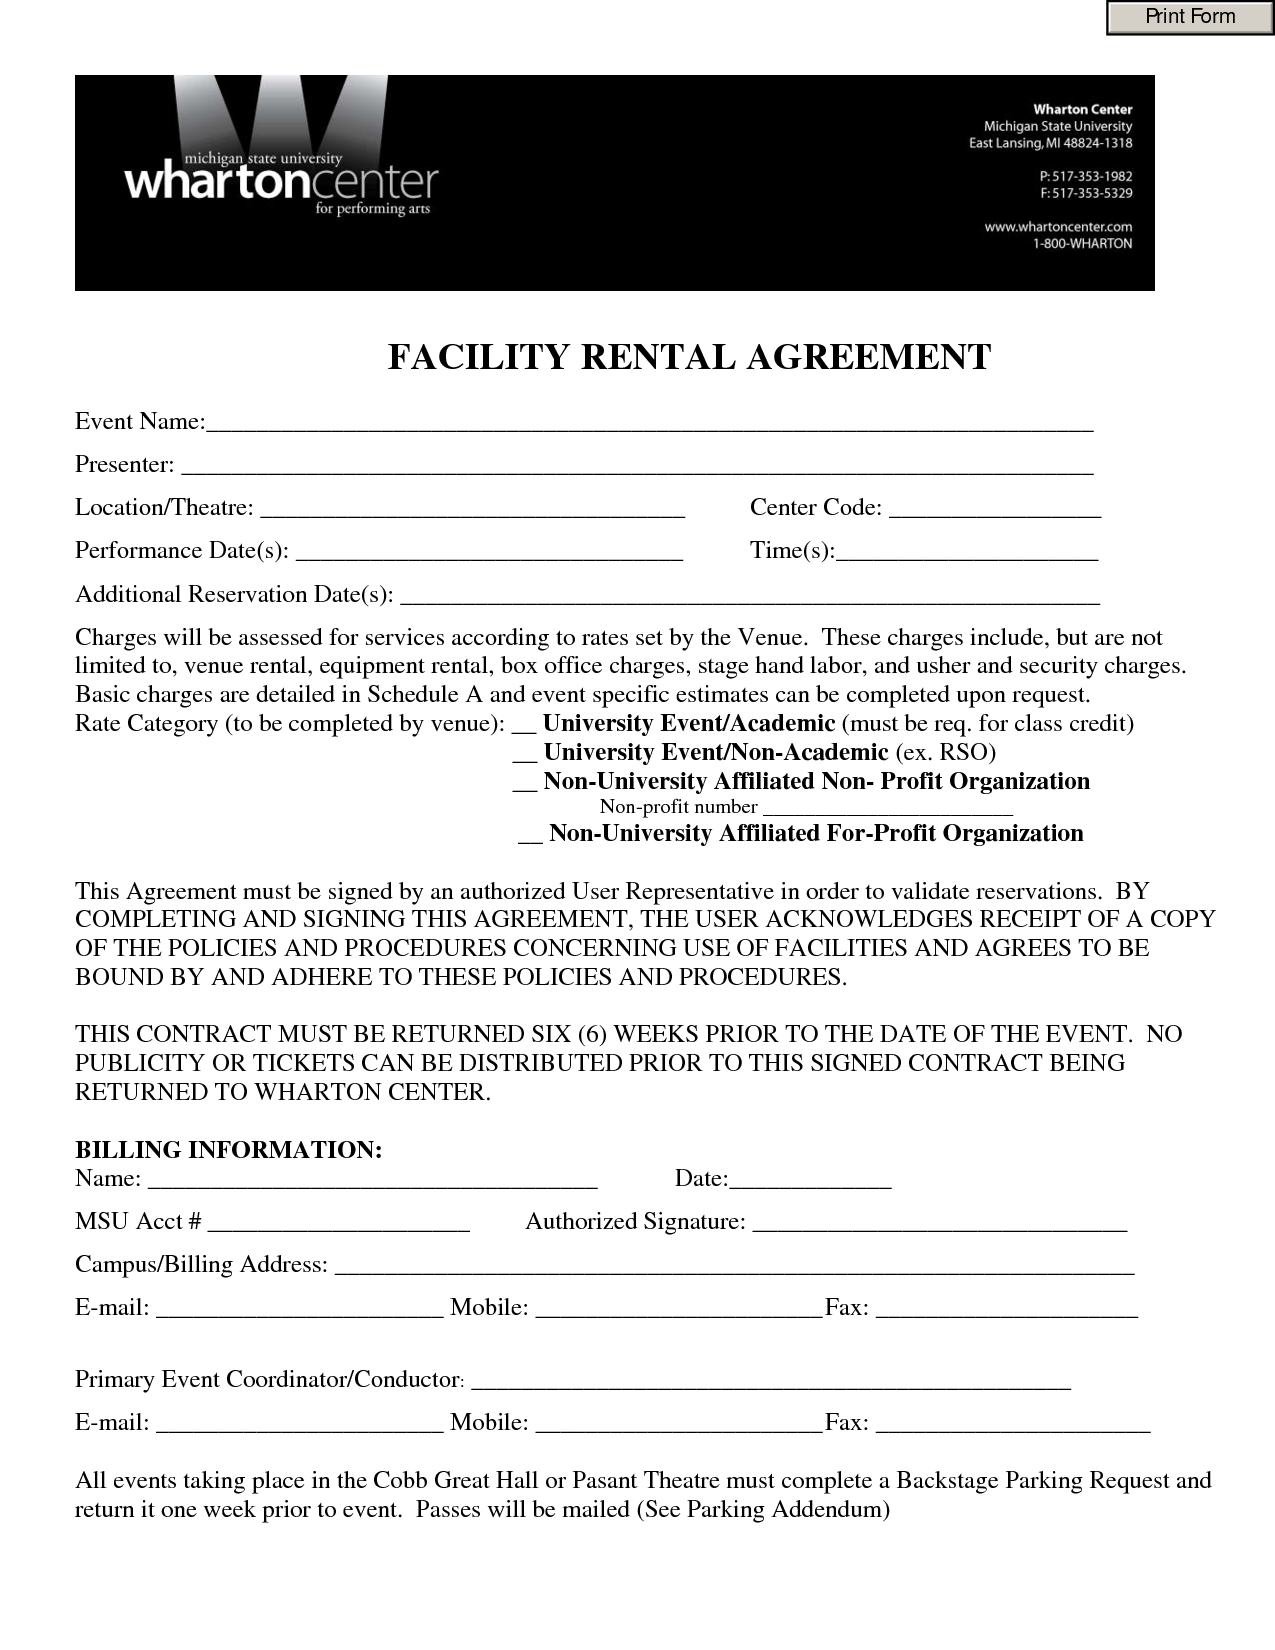 facility-rental-agreement-form-free-printable-documents